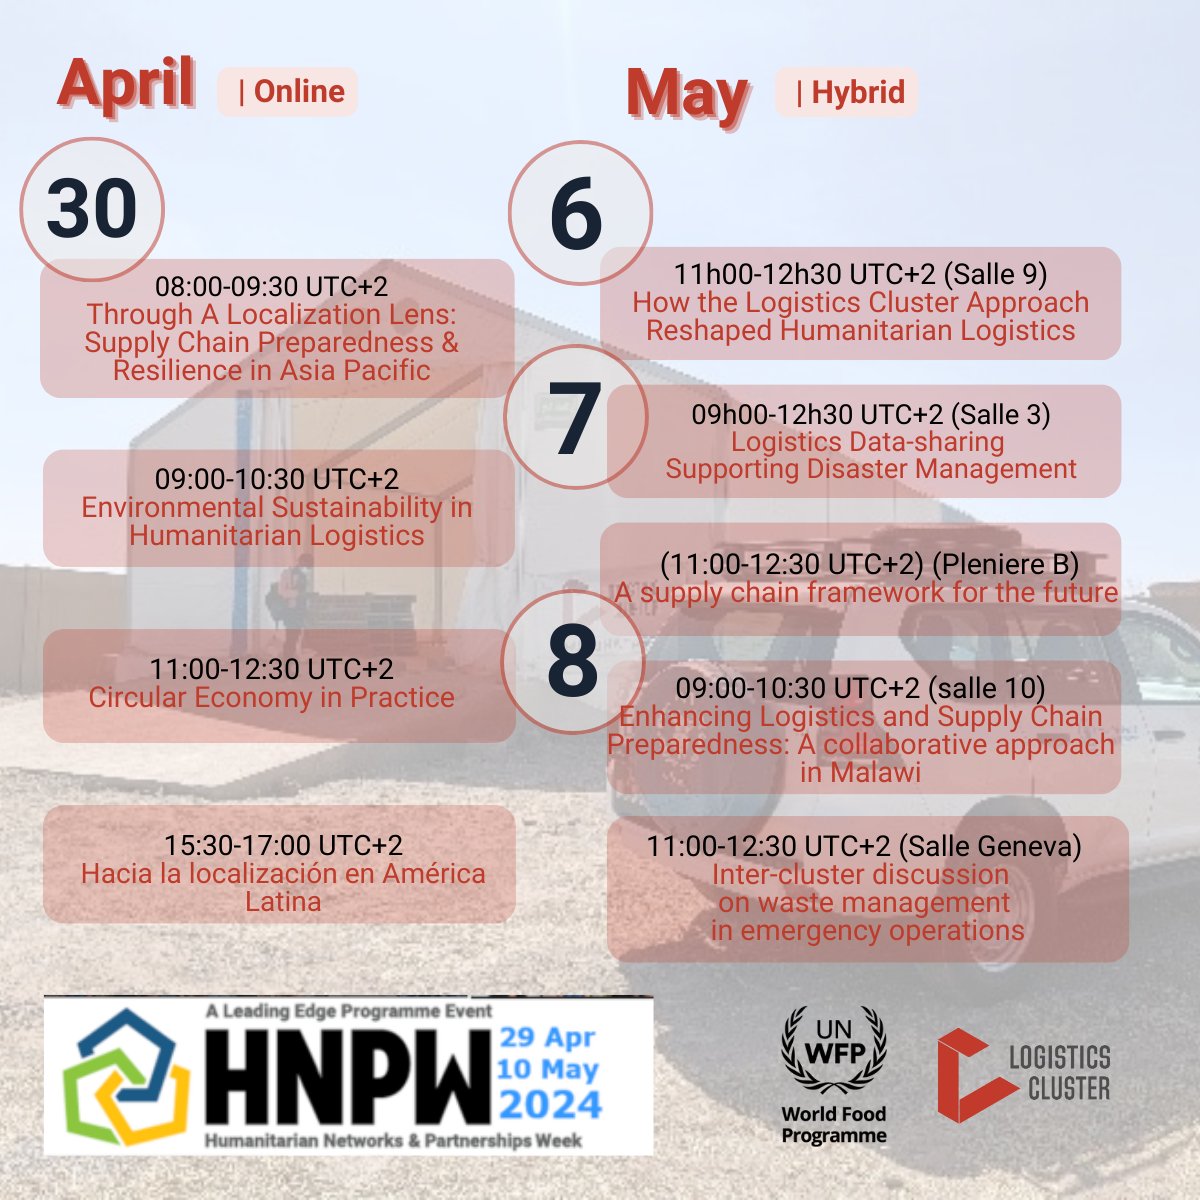 📣 Less than 1 month left until the Humanitarian Networks and Partnerships Week #HNPW 2024 kicks off! 🌍 🤝 The Logistics Cluster is gearing up with partners to actively contribute insights and expertise to various sessions. Secure your spot now: vosocc.unocha.org/Report.aspx?pa…